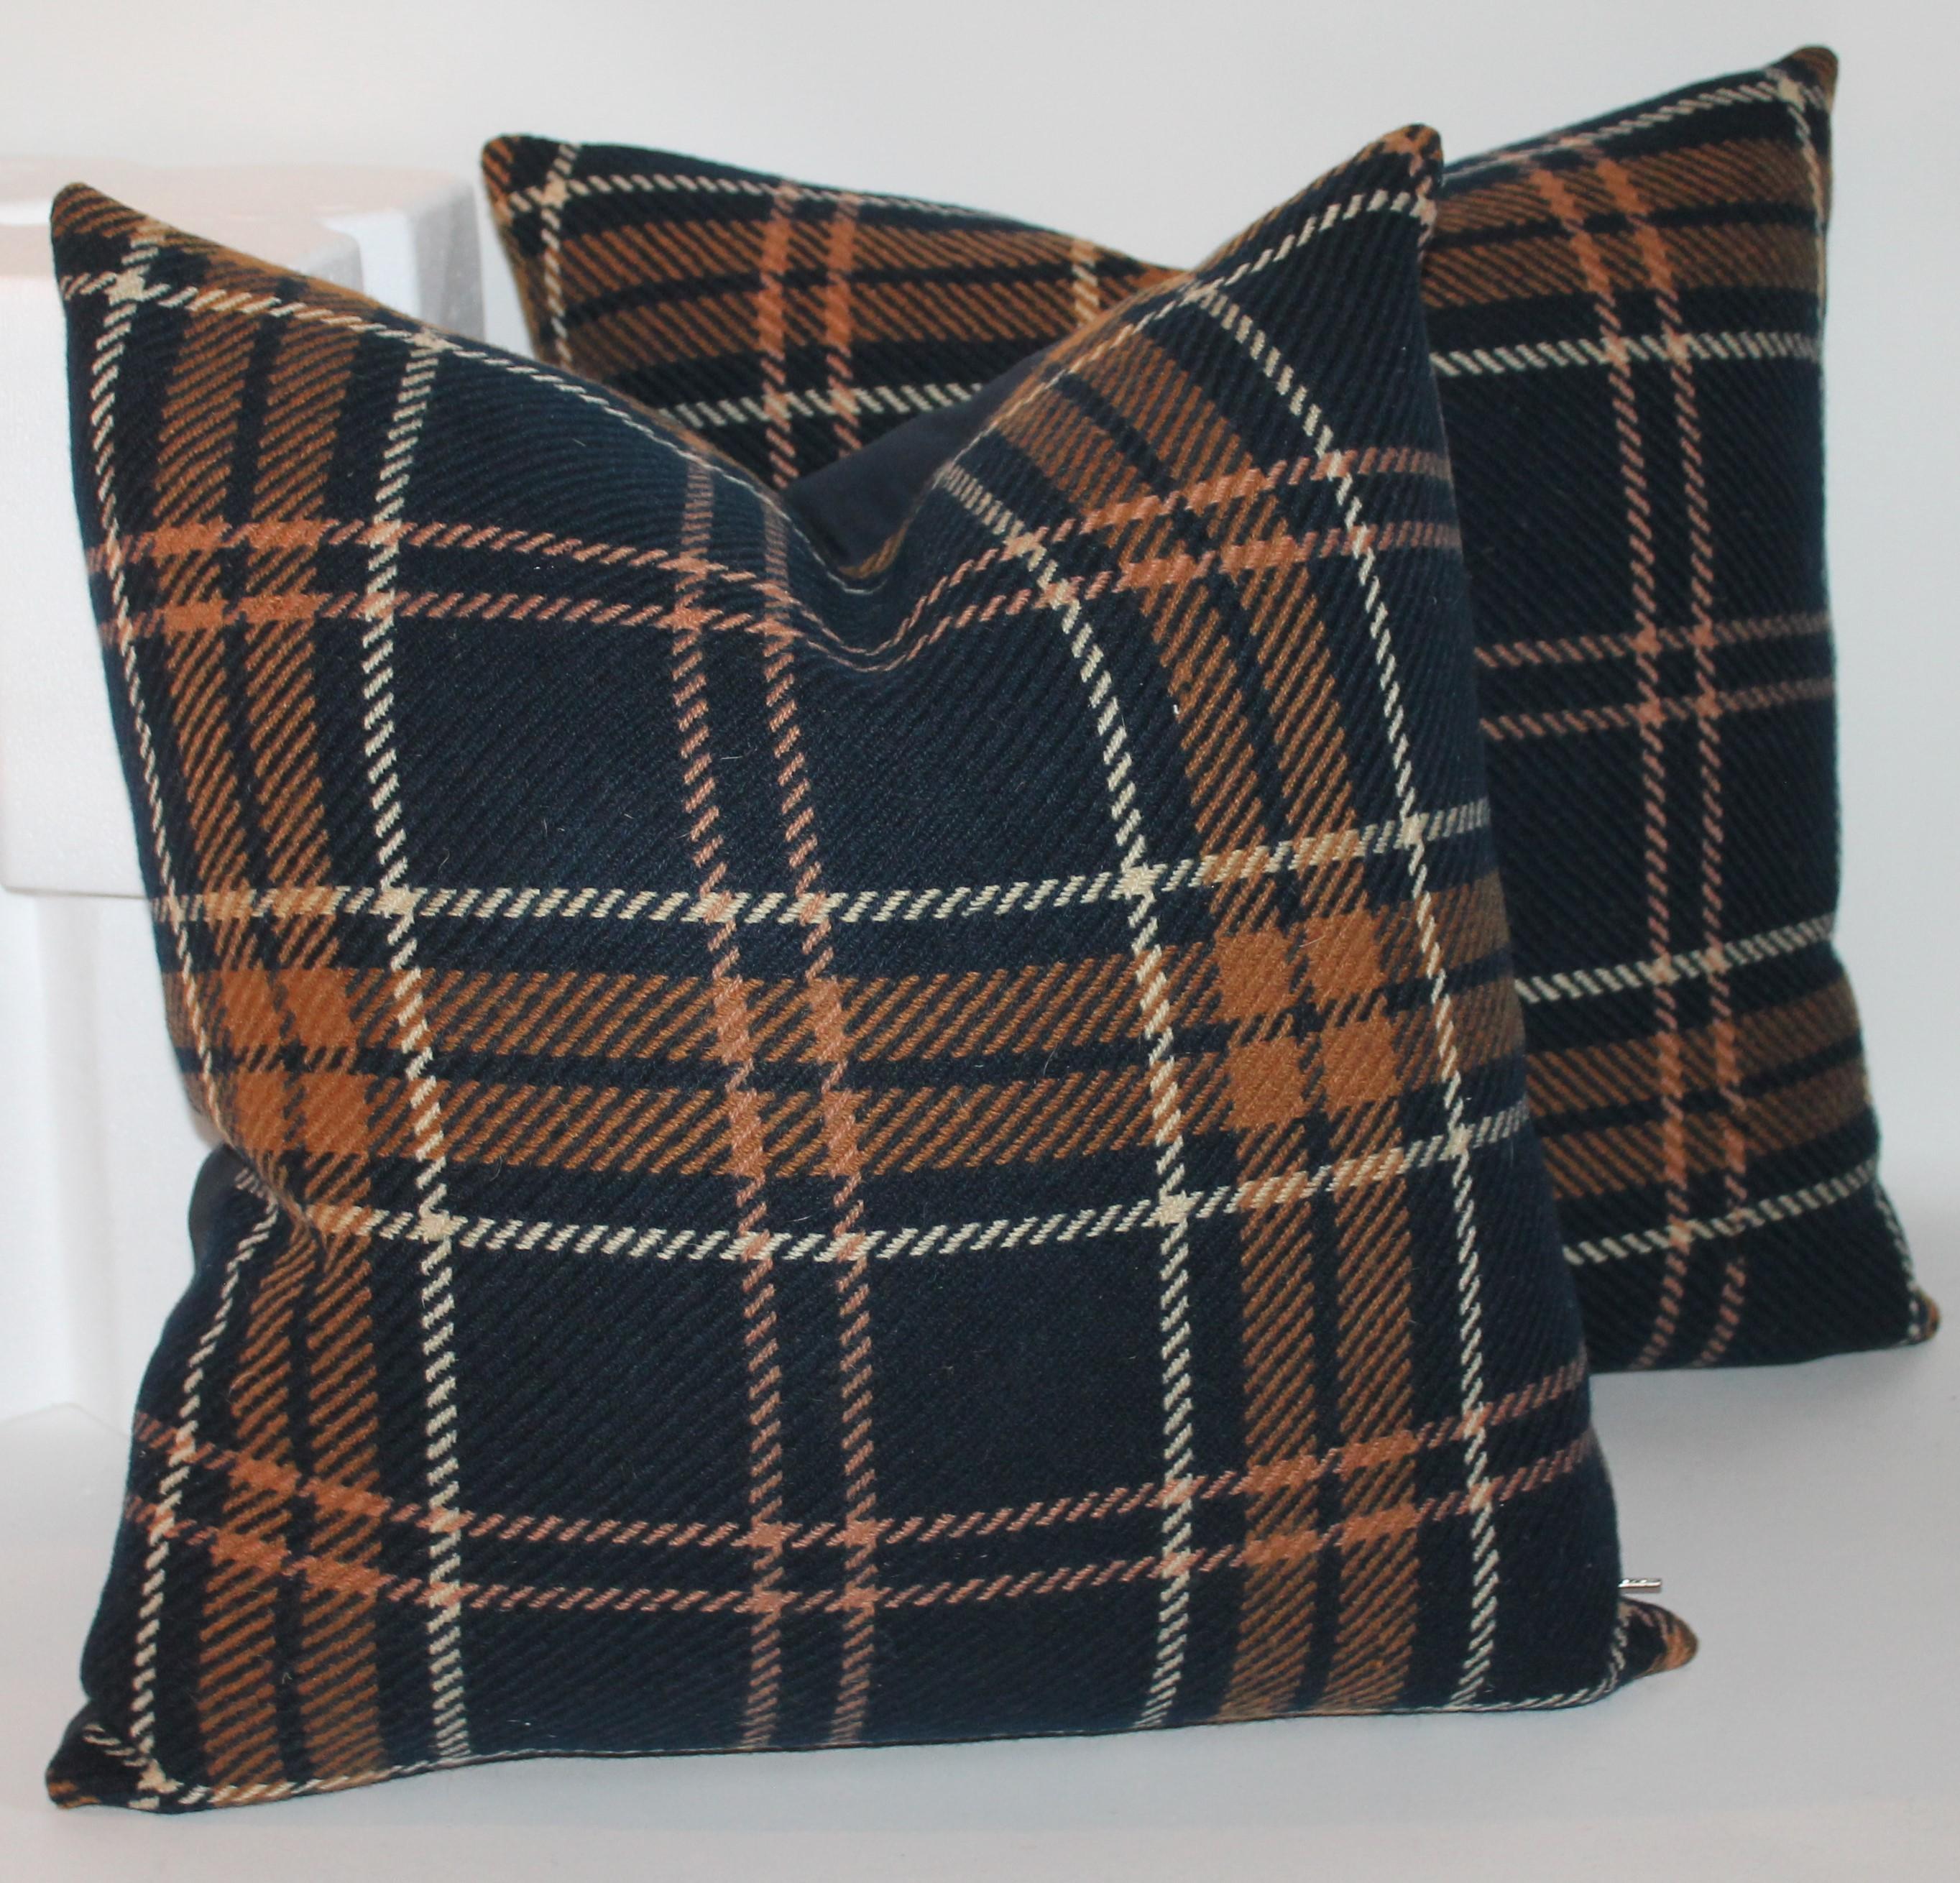 Vintage blanket pillows in blue and brown. Also grey, red and blue blanket pillows in pairs.